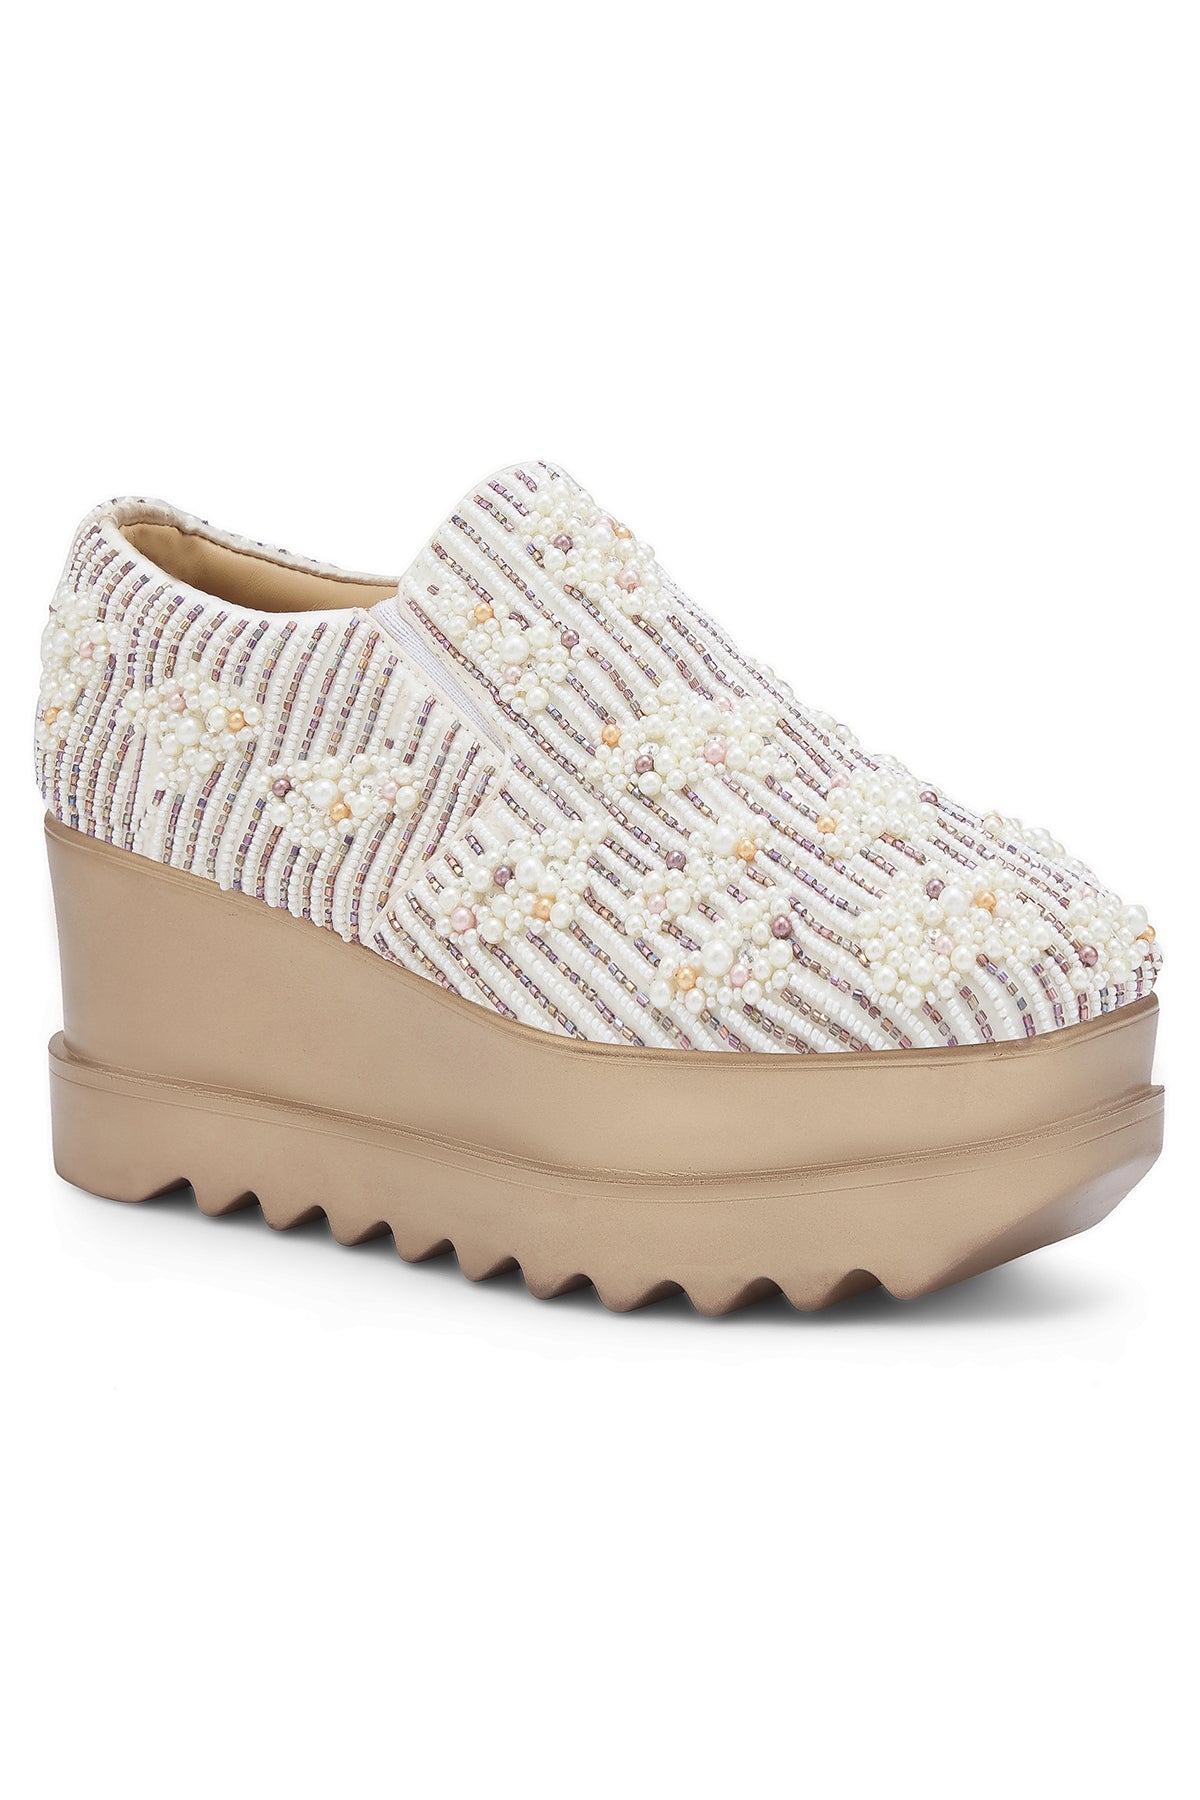 Candy Clouds Wedge Sneakers for Party - Anaar